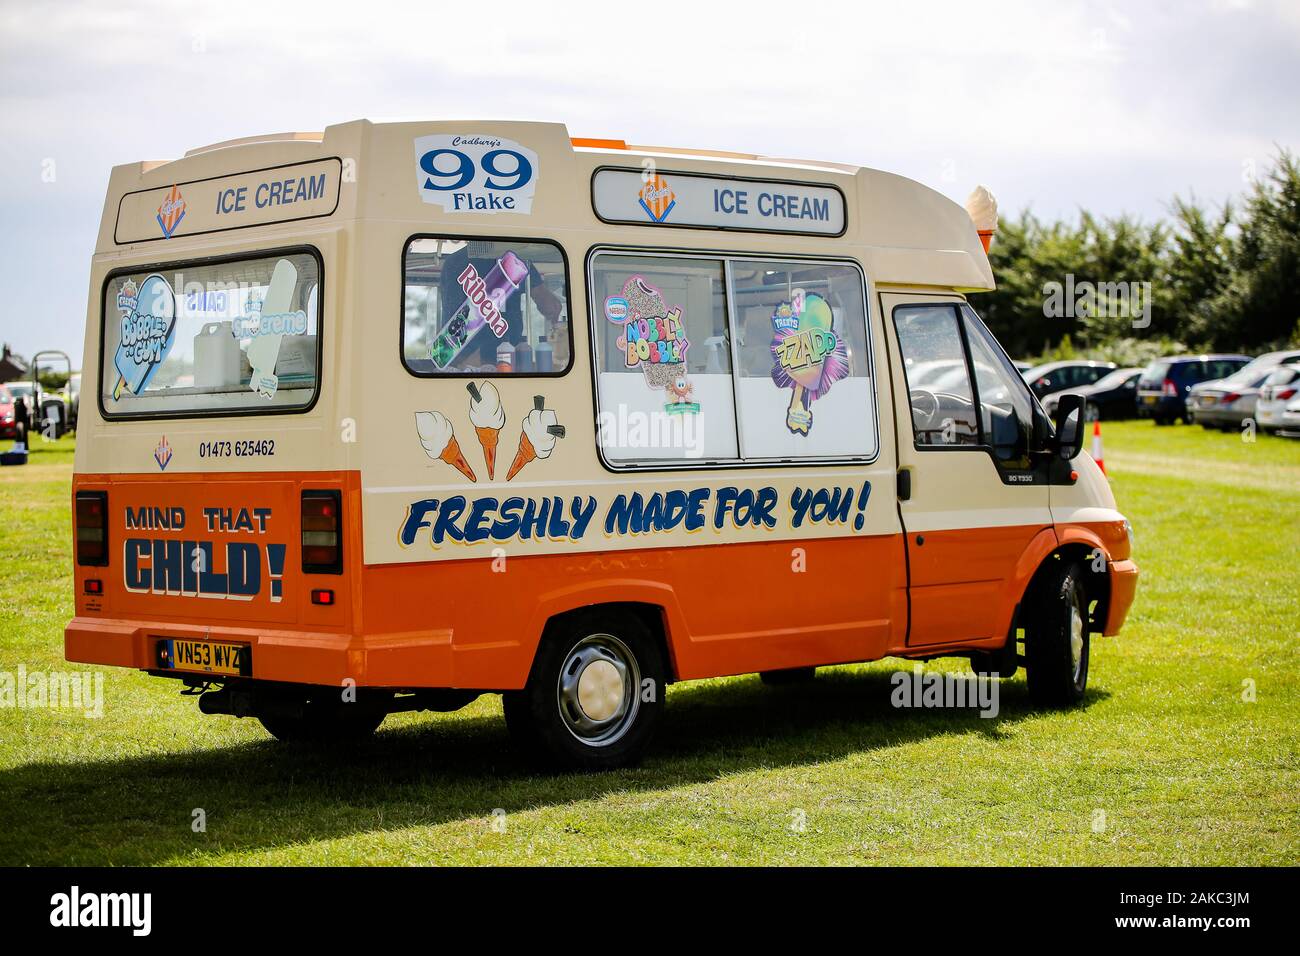 Sutton, Suffolk August 18 2019: A local ice cream truck selling refreshments at a village fete Stock Photo